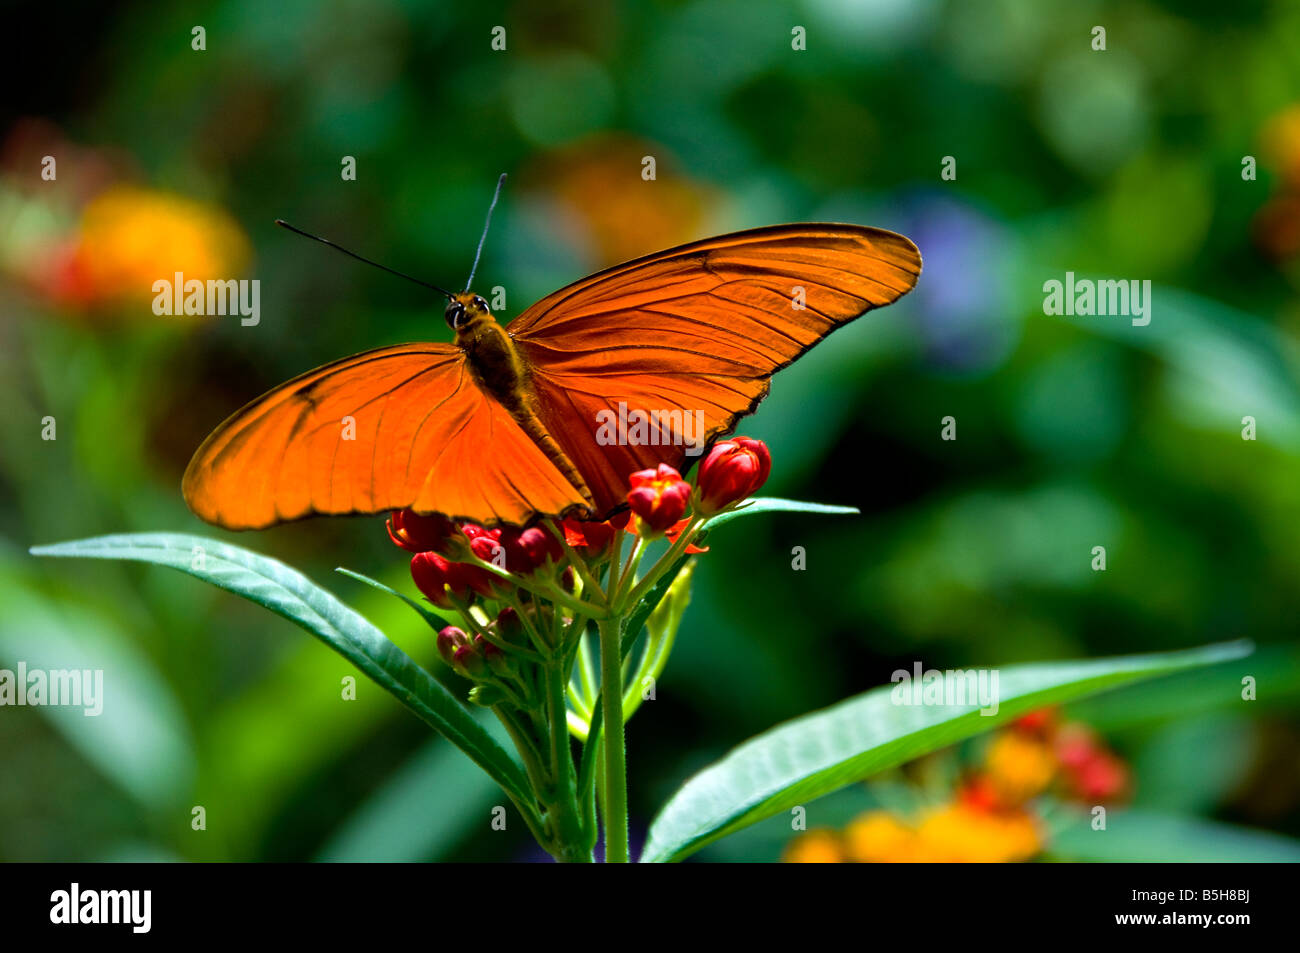 Orange butterfly taking nectar from flowers in a sunny natural lush habitat Stock Photo